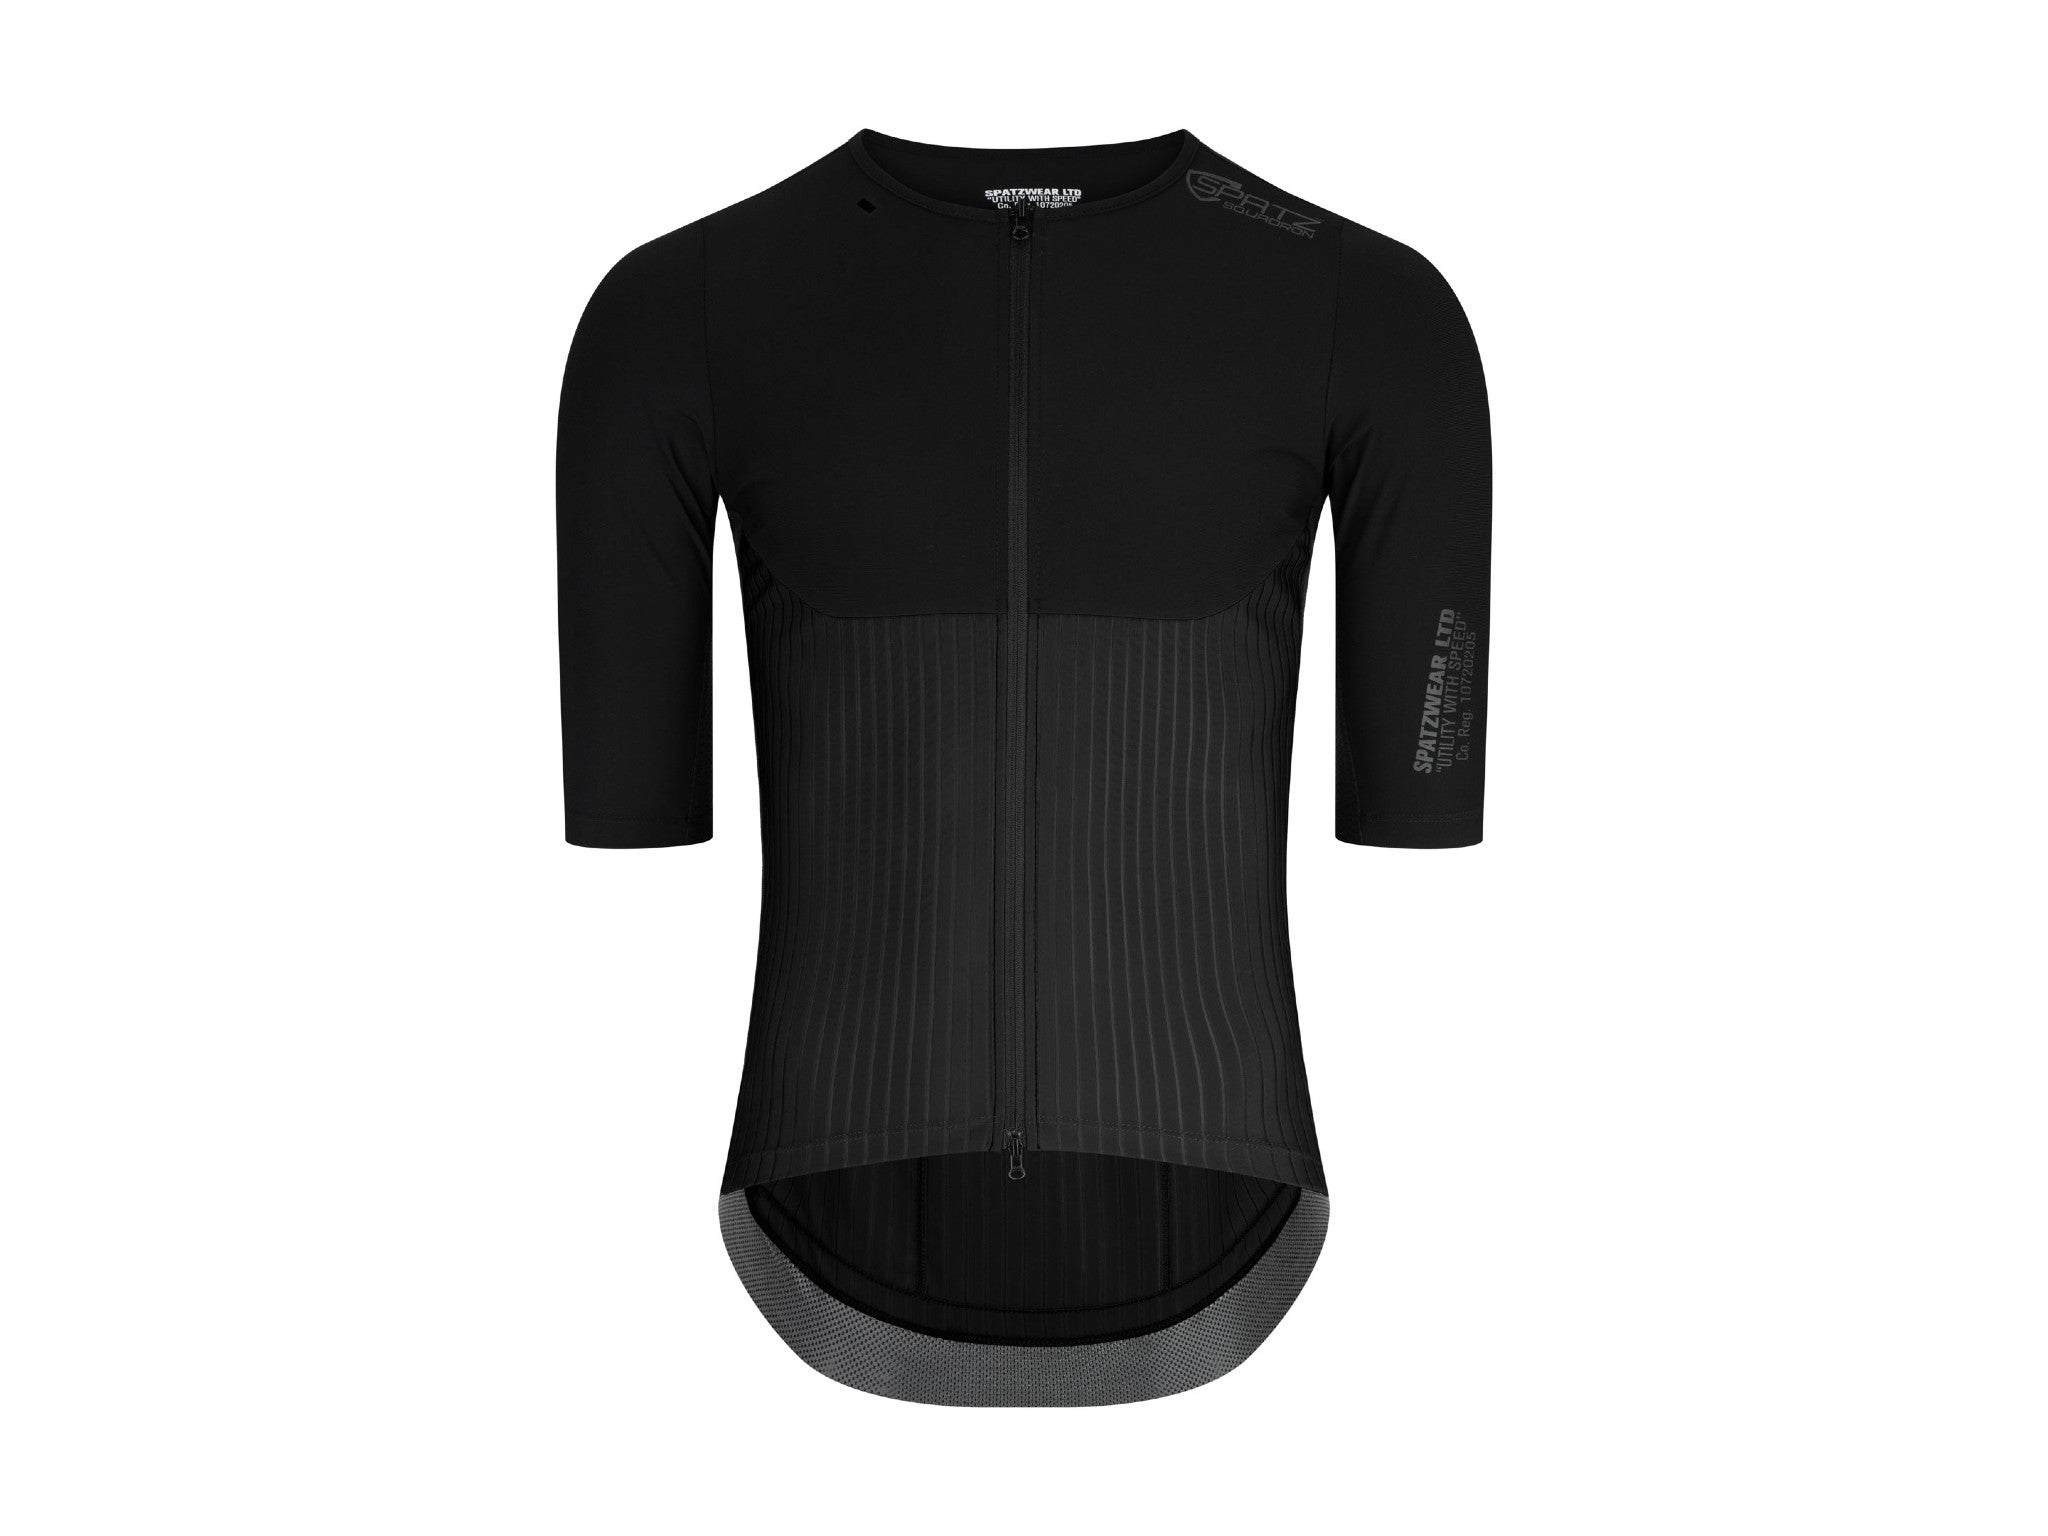 Men's Short/Long Sleeve Cycling Jersey Bike Jerseys Cycle Biking Shirt with Quick Dry Breathable Fabric 